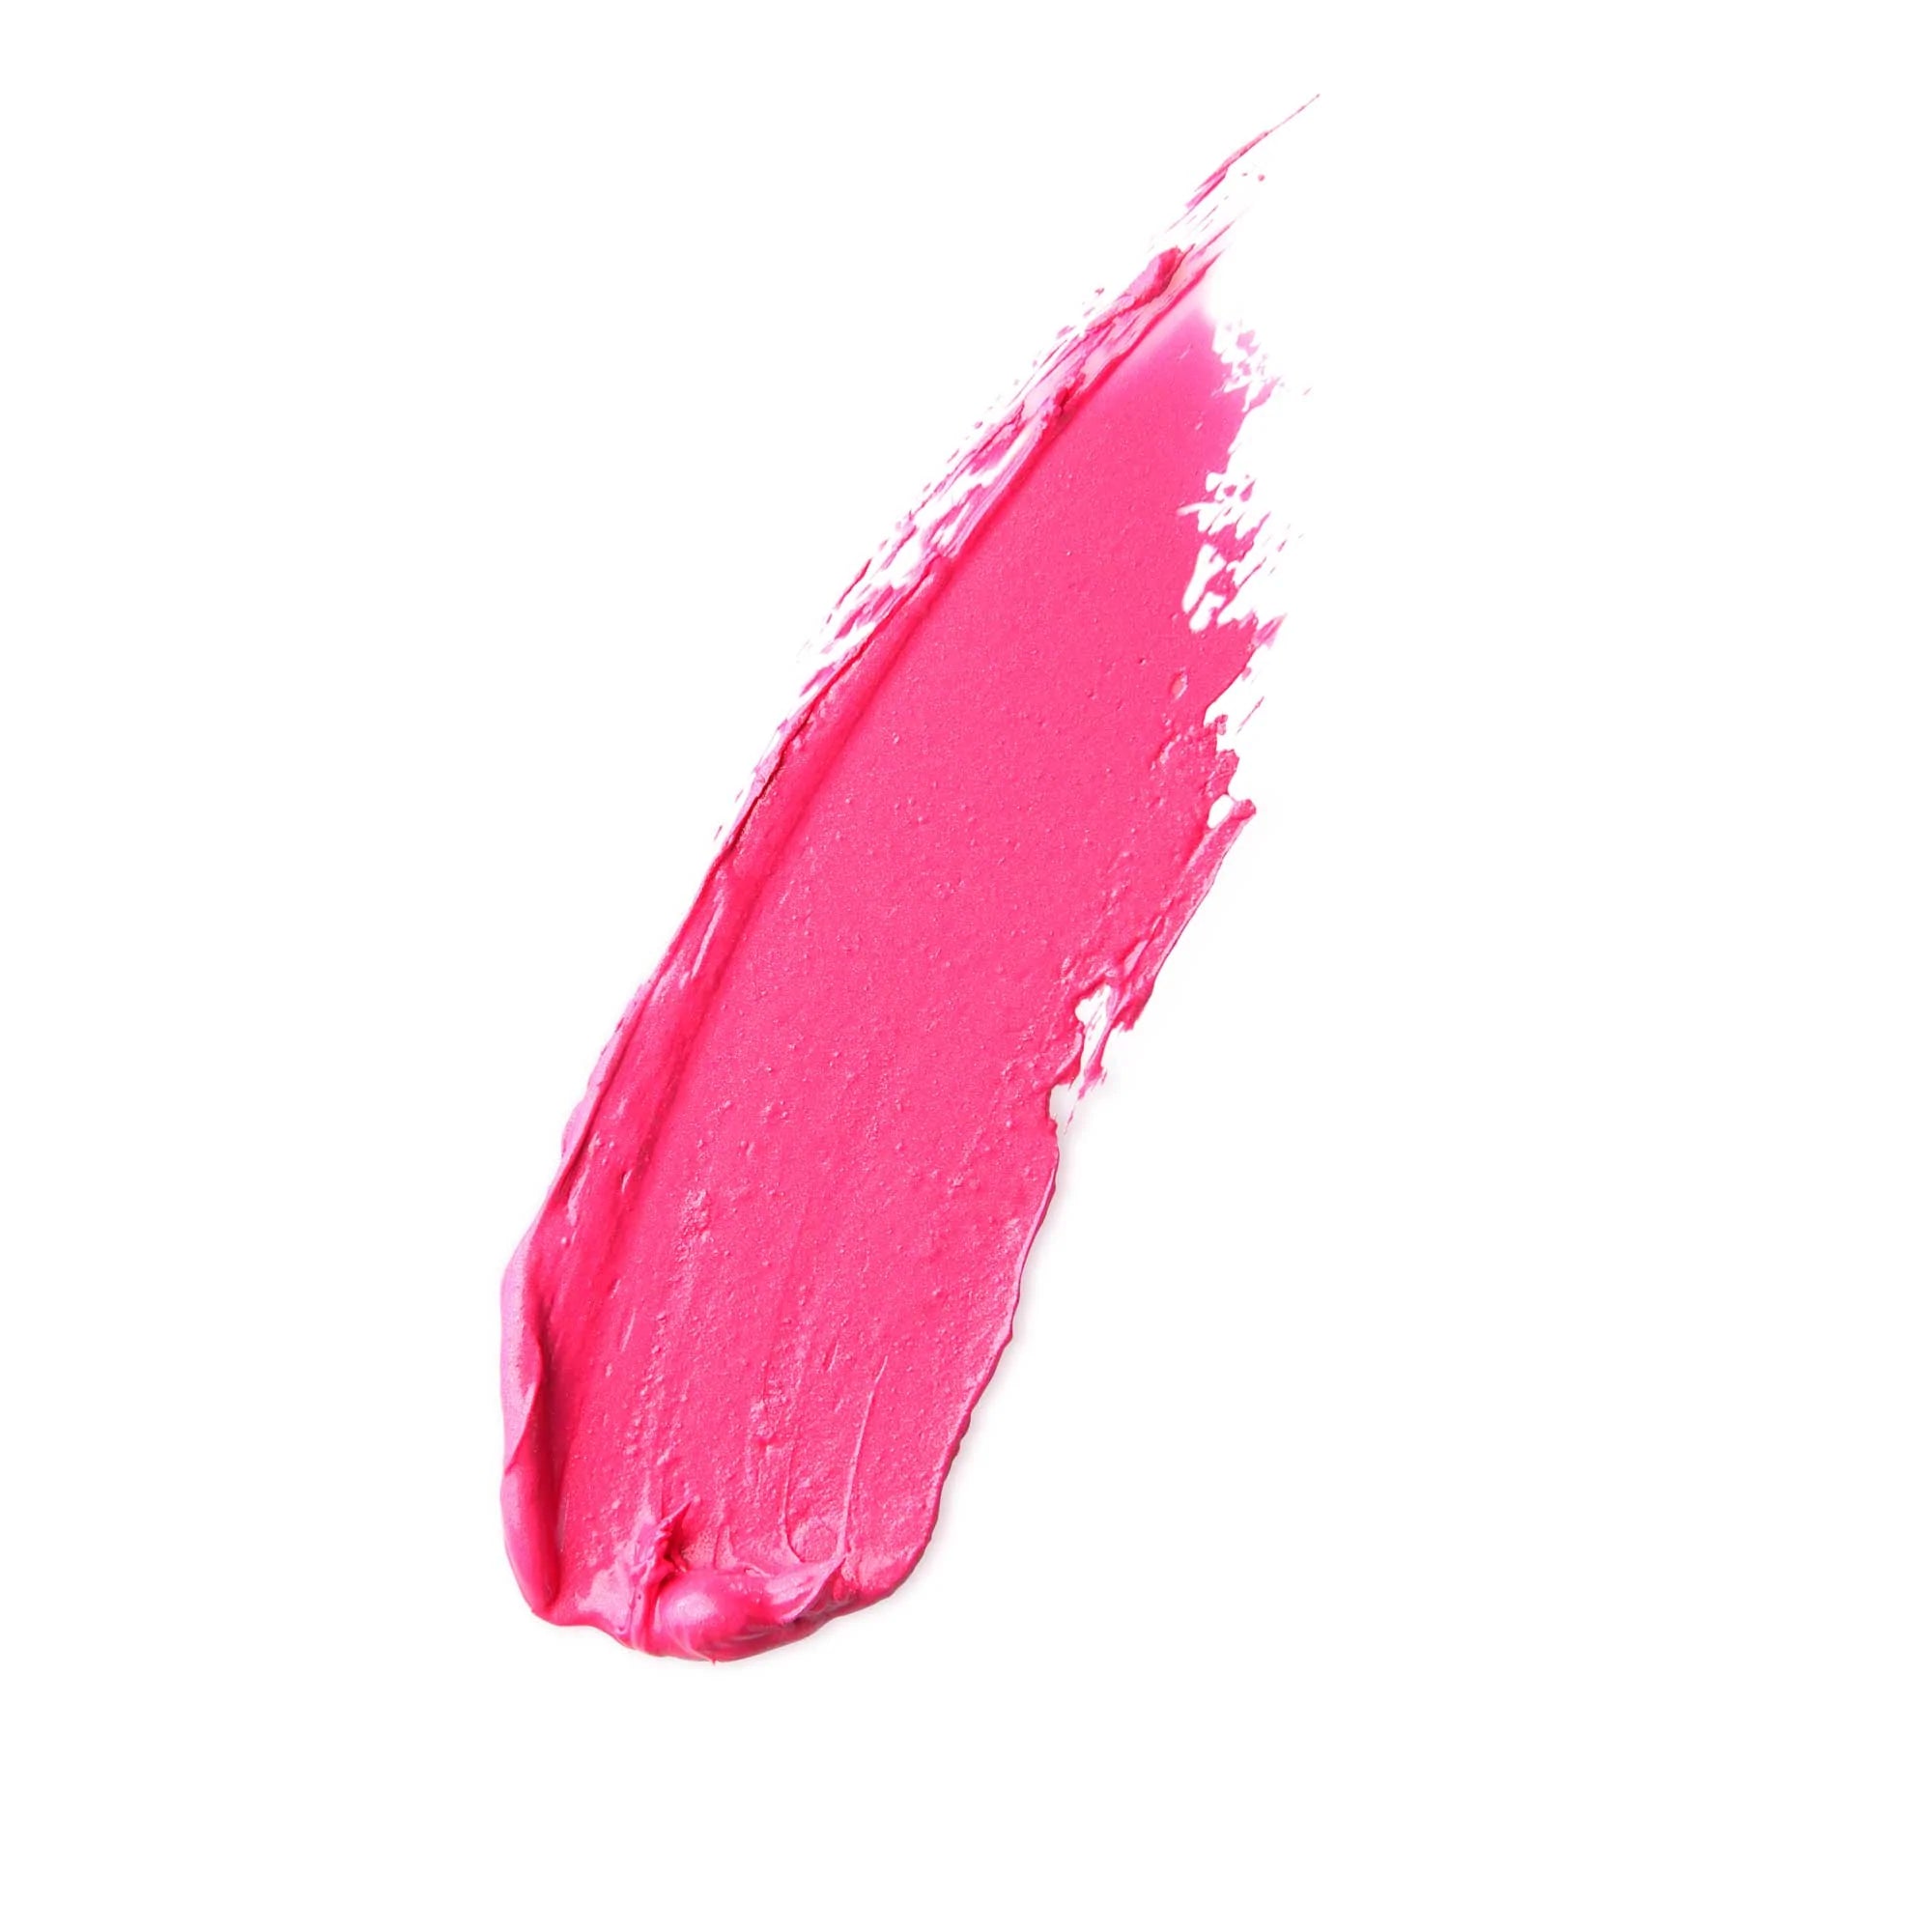 Antipodes Dragon Fruit Pink Moisture-Boost Natural Lipstick 4g-The Living Co.